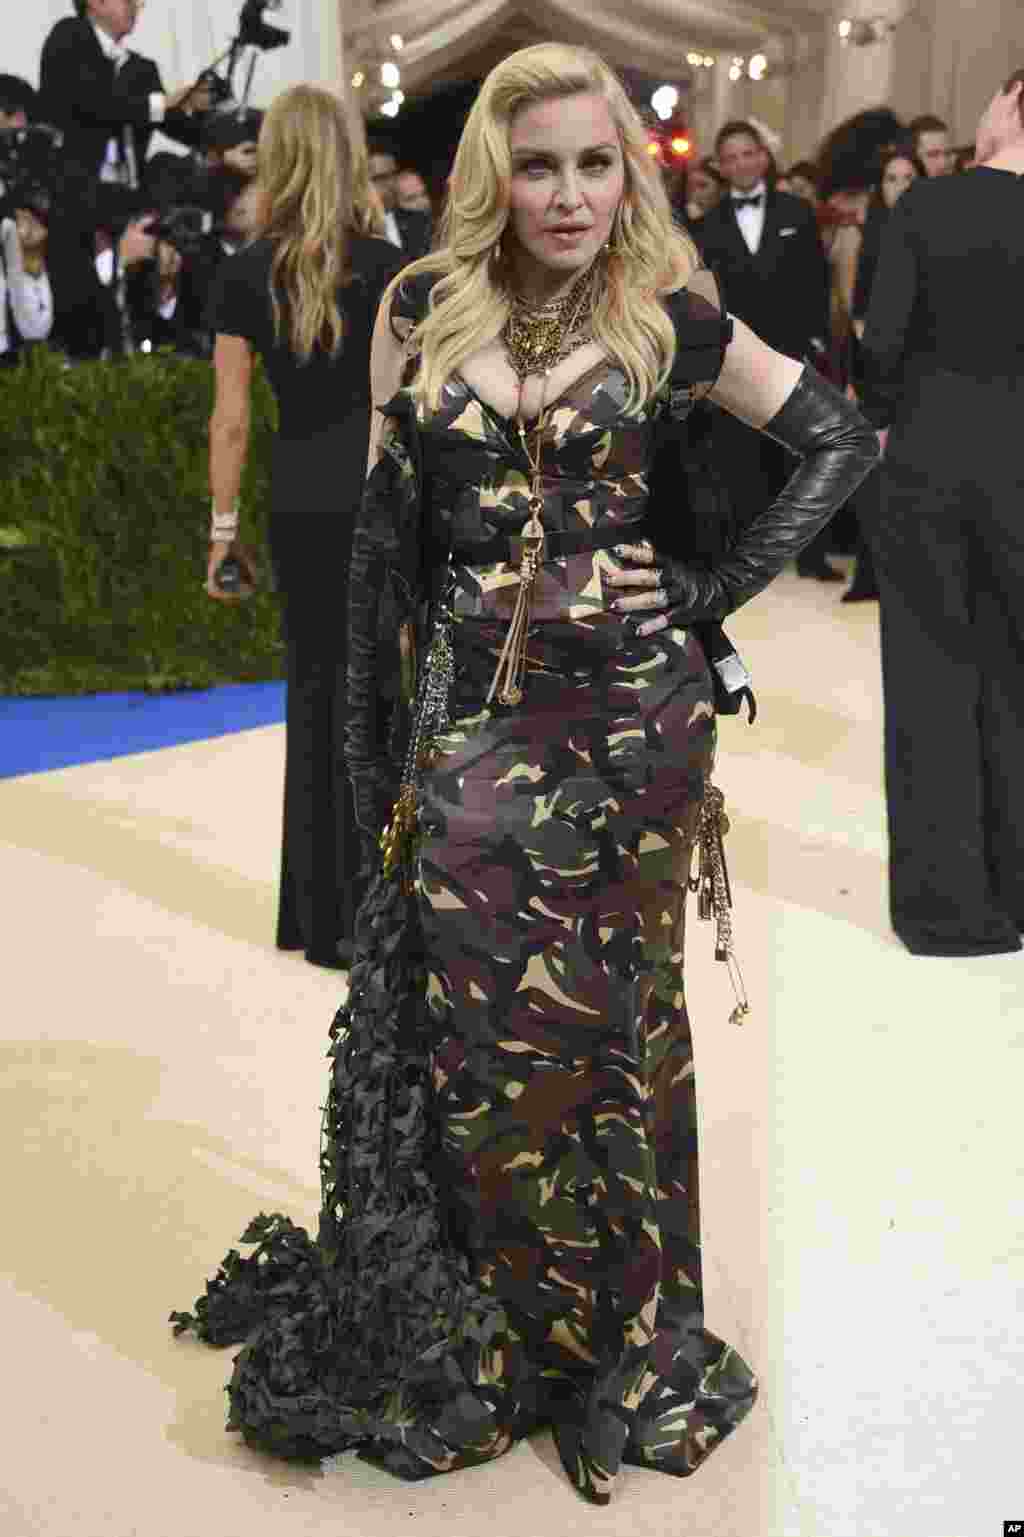 Madonna attends The Metropolitan Museum of Art's Costume Institute benefit gala celebrating the opening of the Rei Kawakubo/Comme des Garçons: Art of the In-Between exhibition on May 1, 2017, in New York.